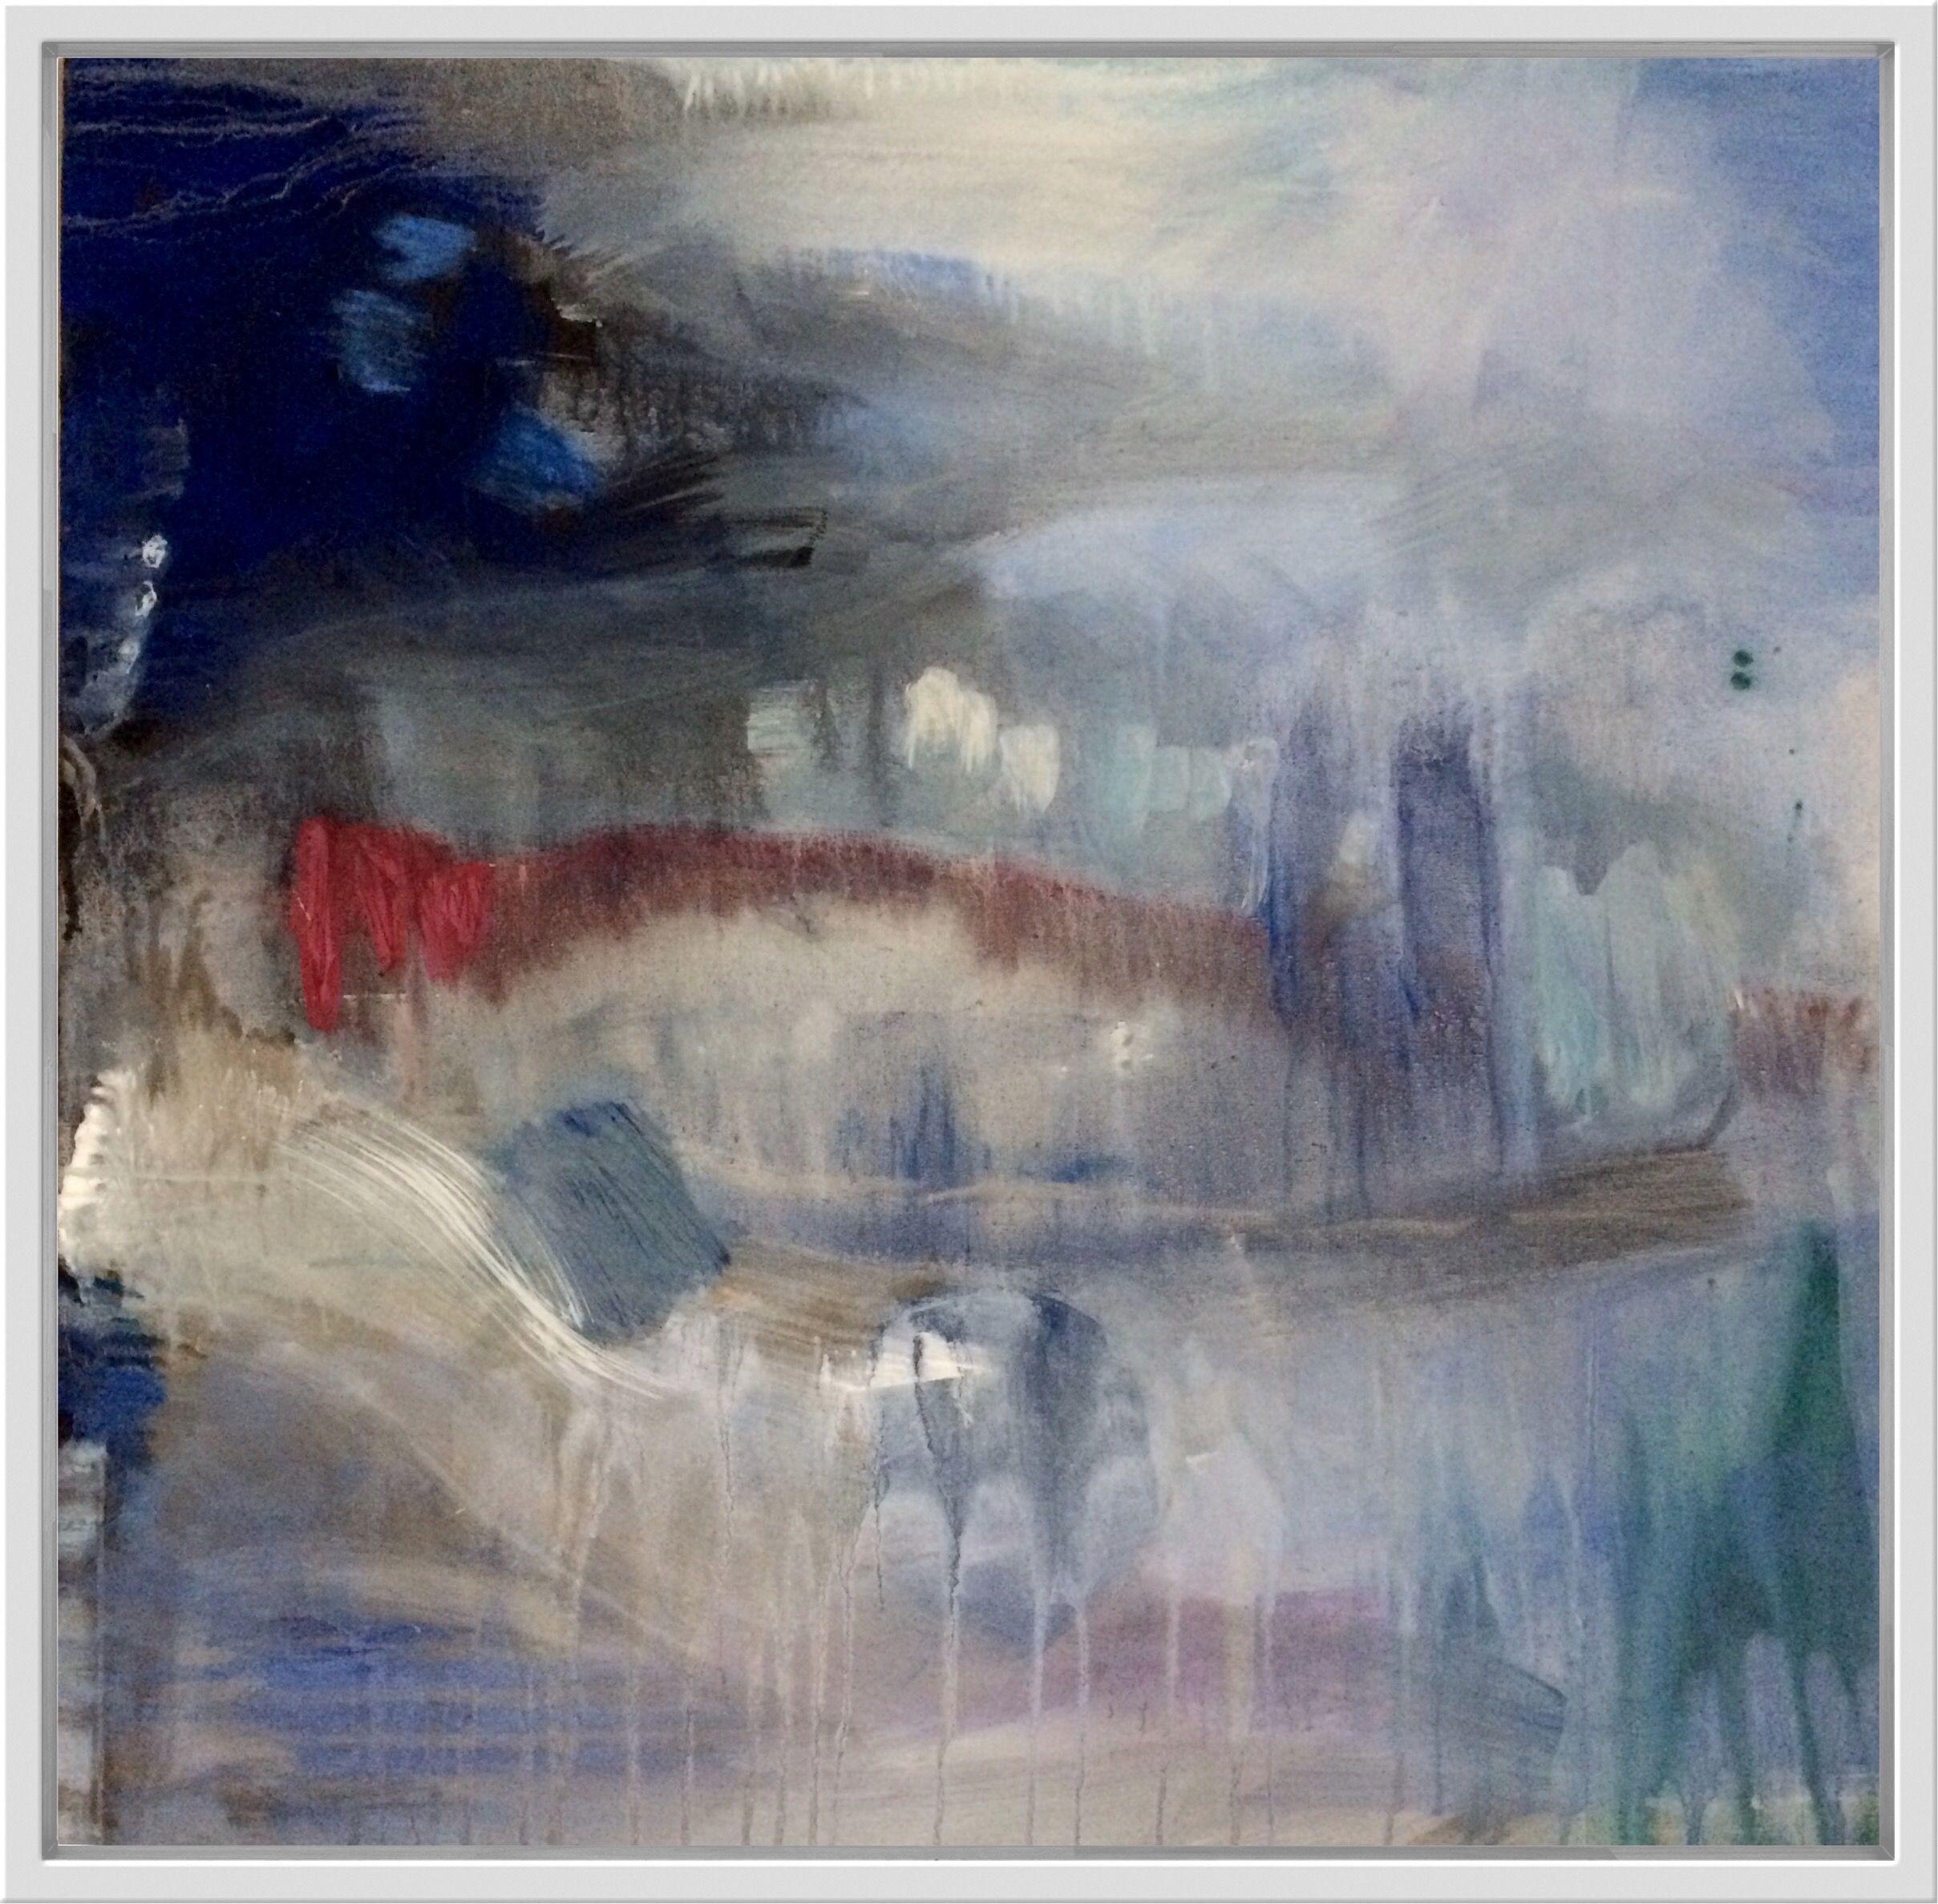 Listen to the Rain, Painting, Acrylic on Canvas - Gray Abstract Painting by Gesa Reuter